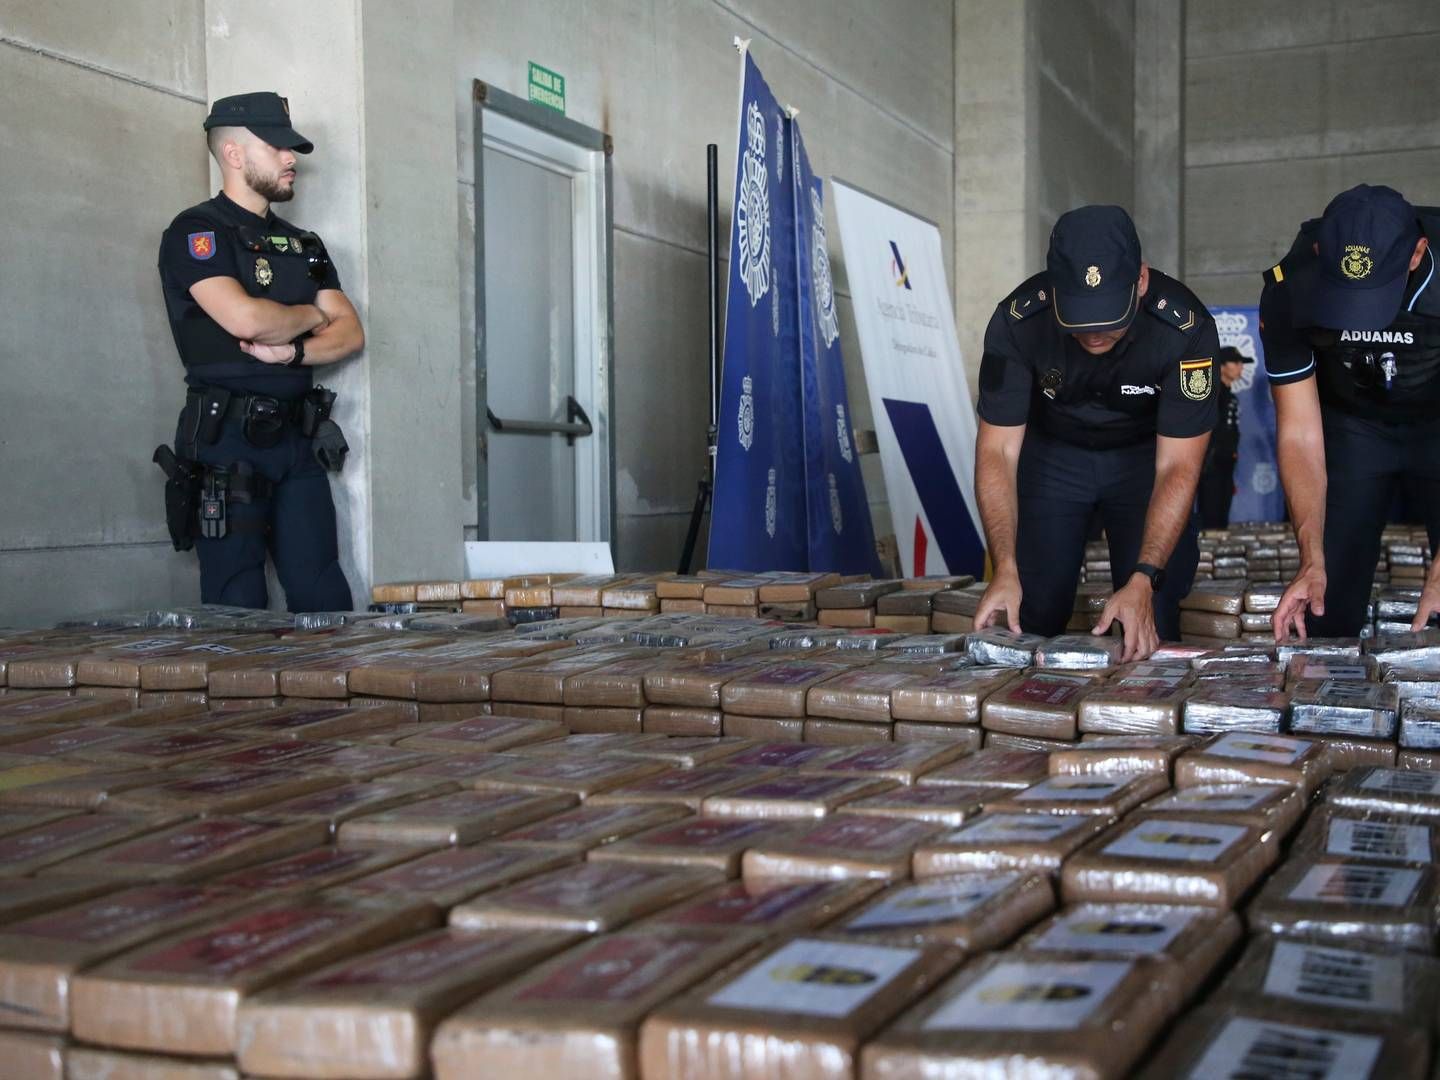 Spanish police display a large shipment of cocaine found in containers in the major port of Algeciras. | Photo: Nono Rico/AP/Ritzau Scanpix